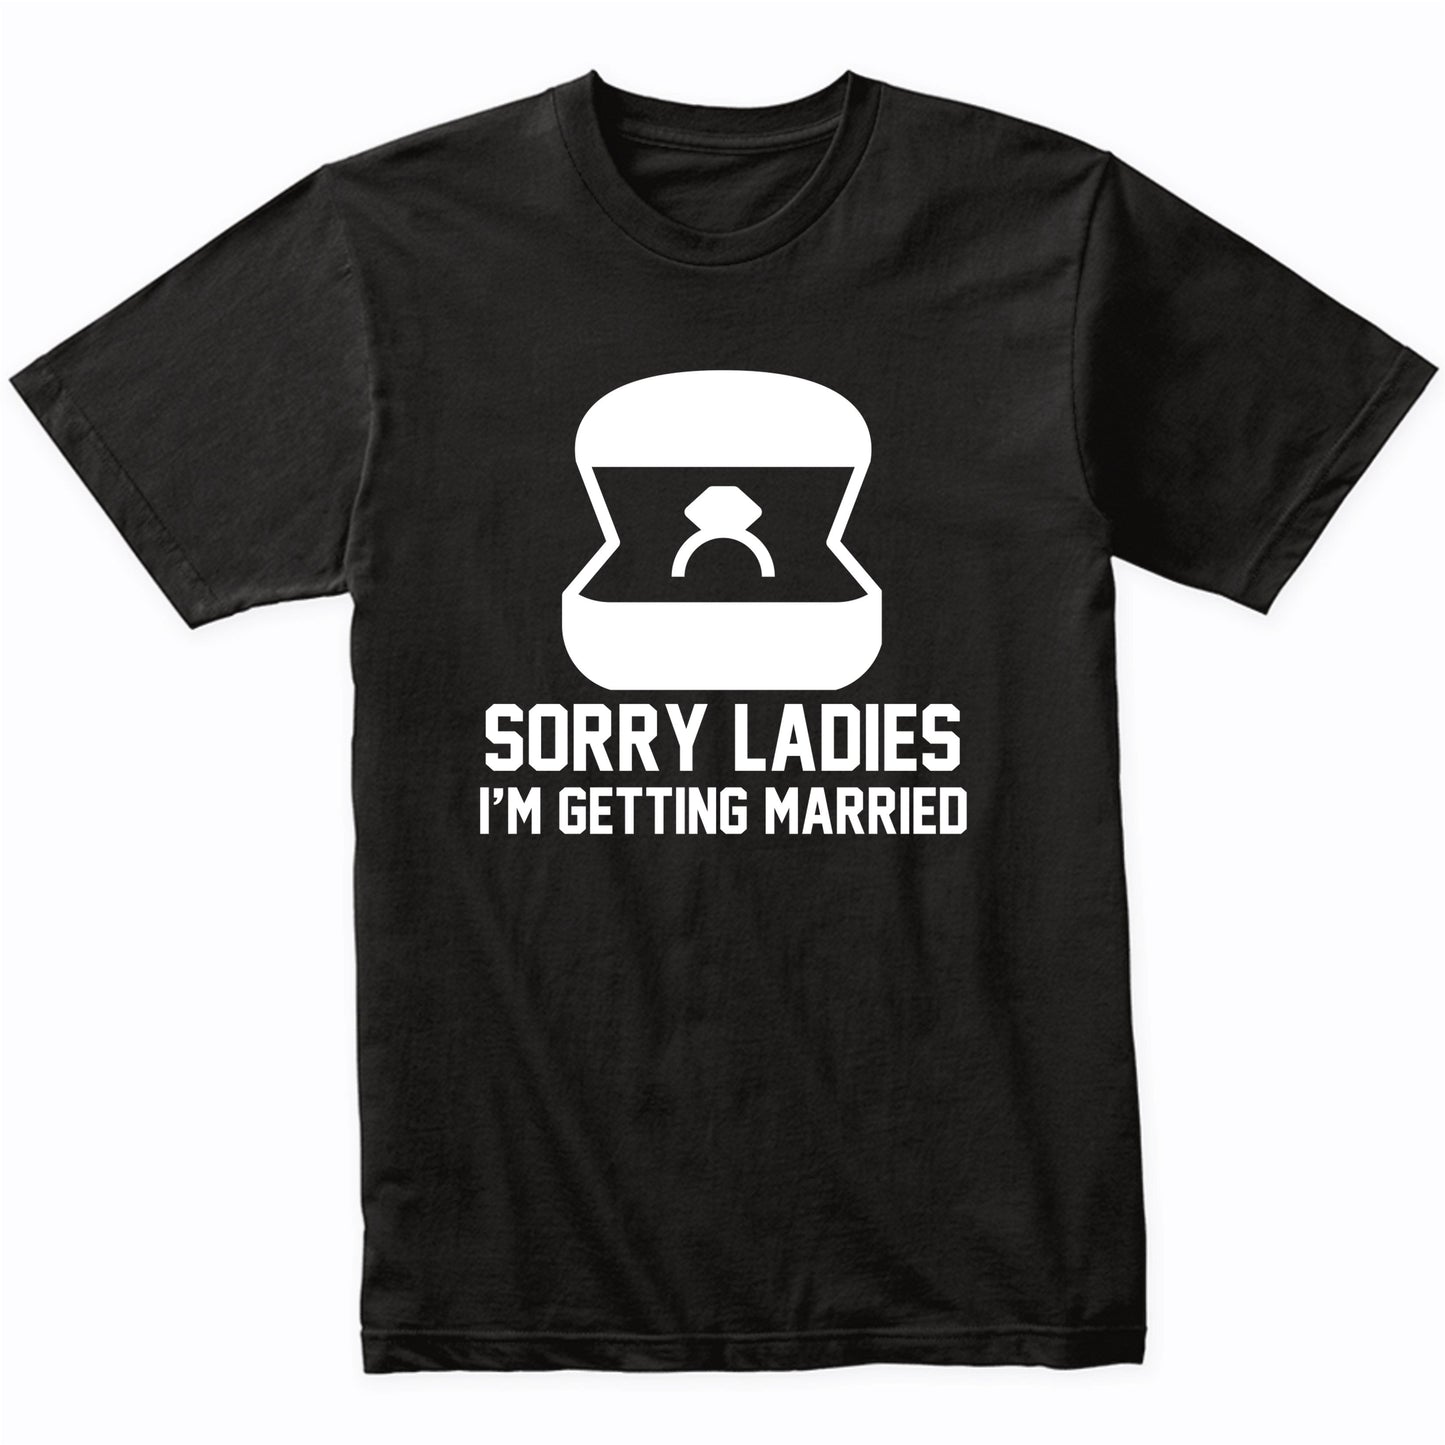 Sorry Ladies I'm Getting Married Funny Bachelor Party Shirt